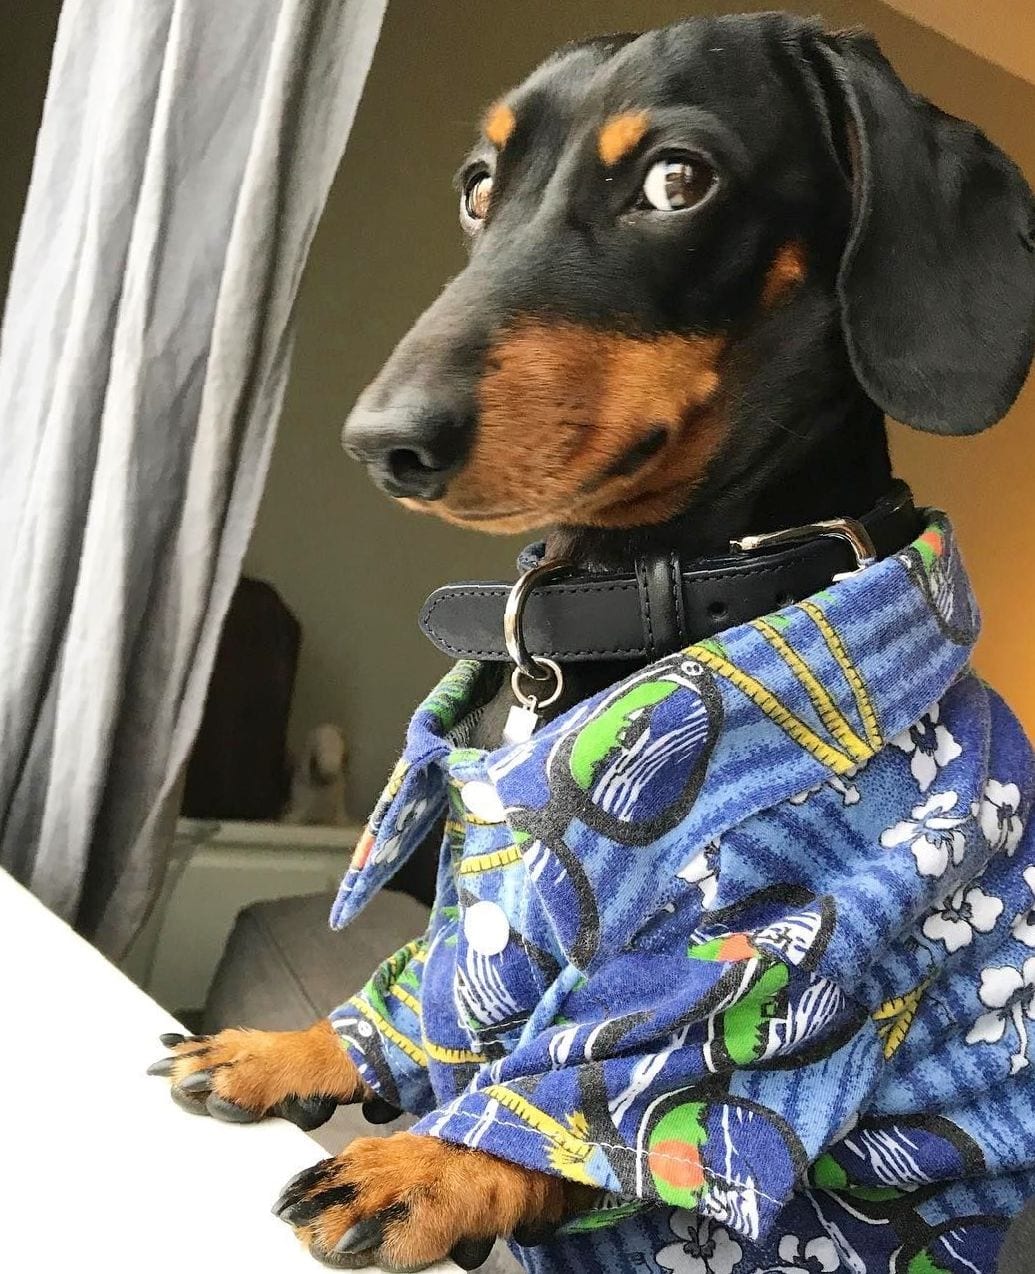 A Dachshund wearing a polo shirt while leaning towards the window sill